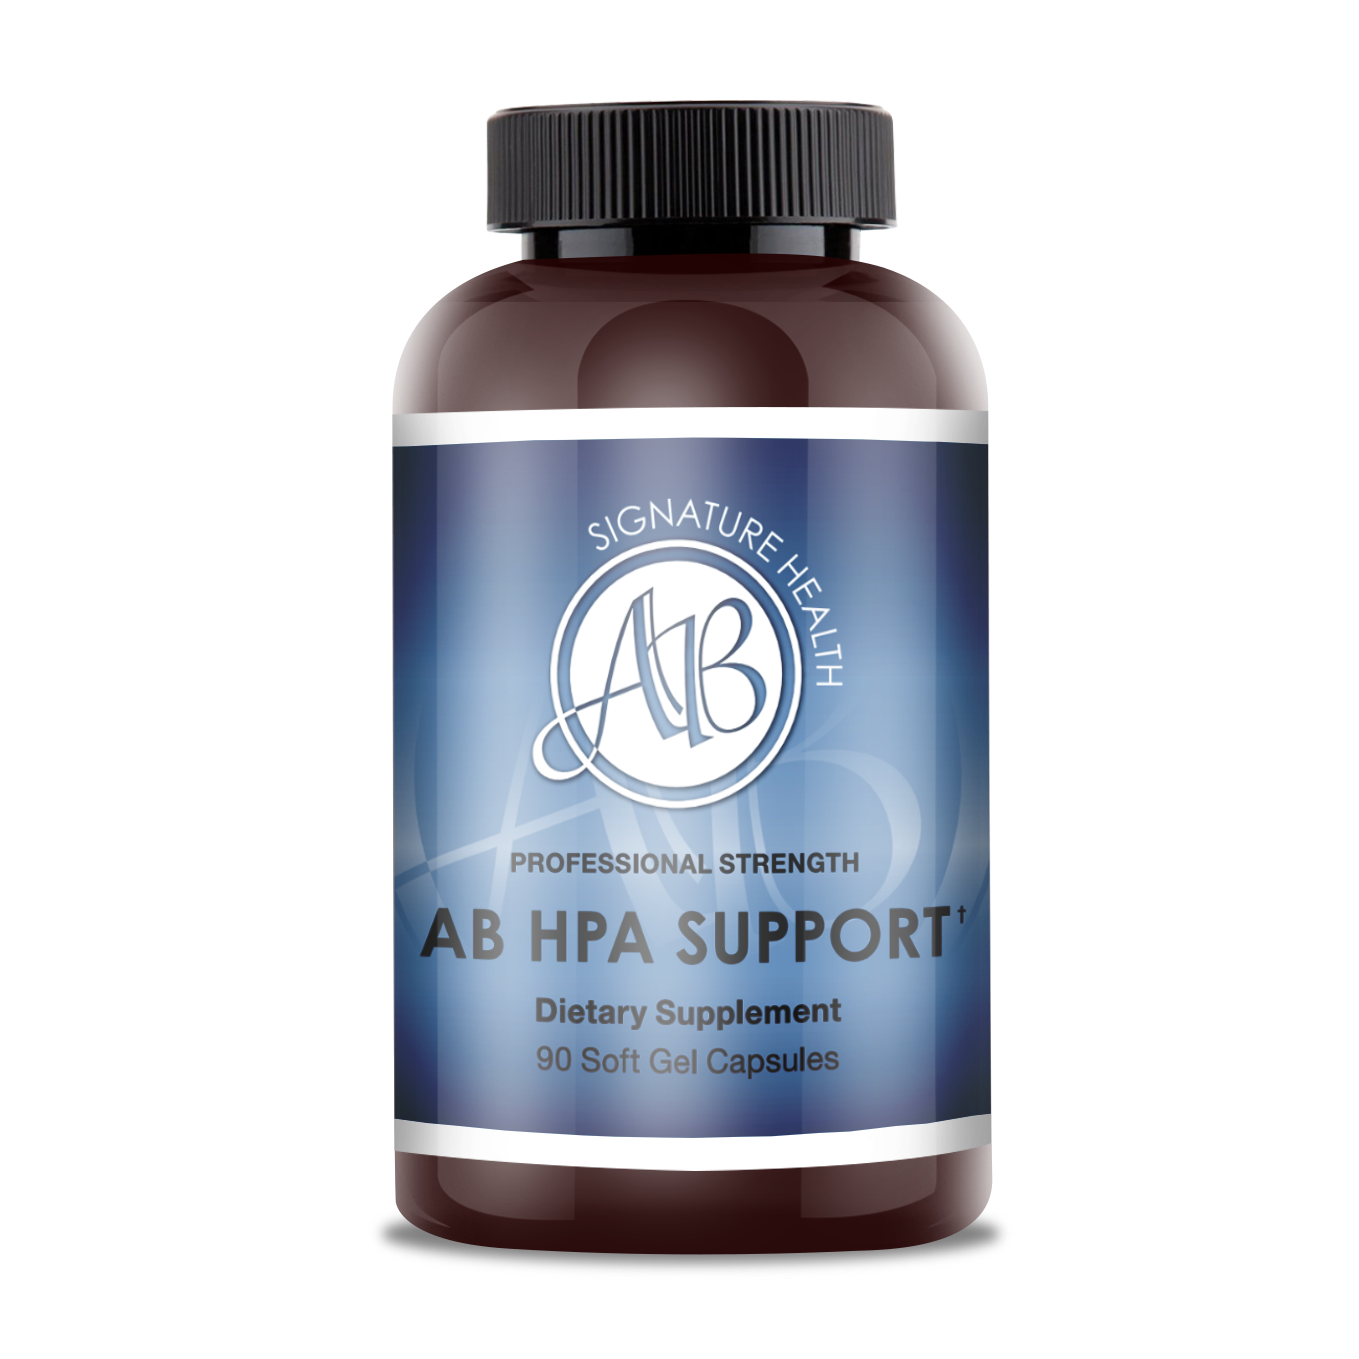 AB HPA Support